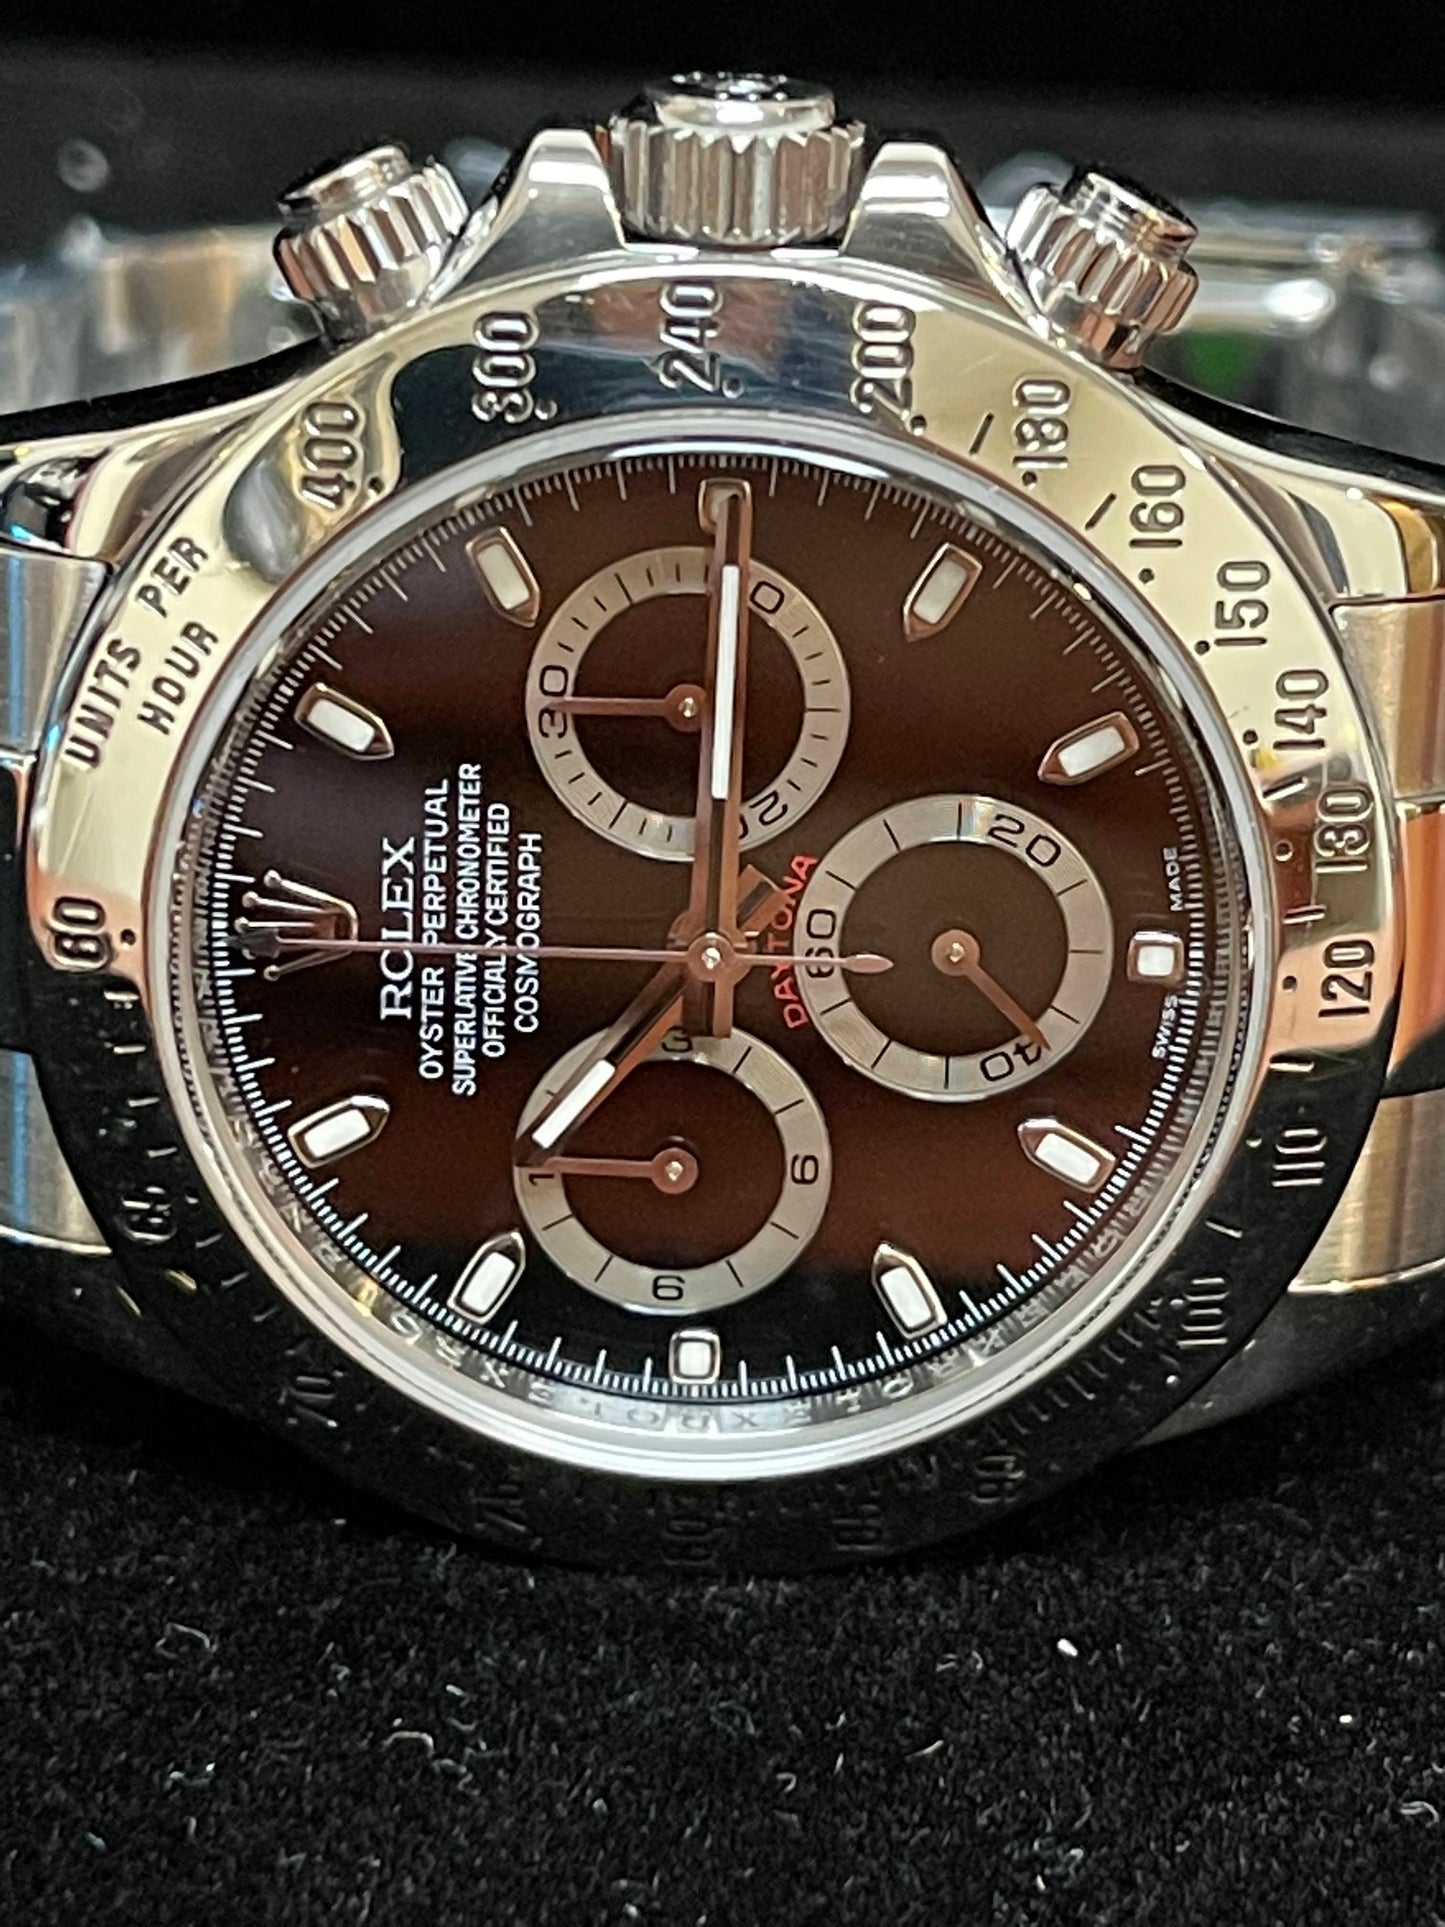 2009 Rolex Daytona Cosmograph 116520 Black Dial W/Boxset And Papers 40mm